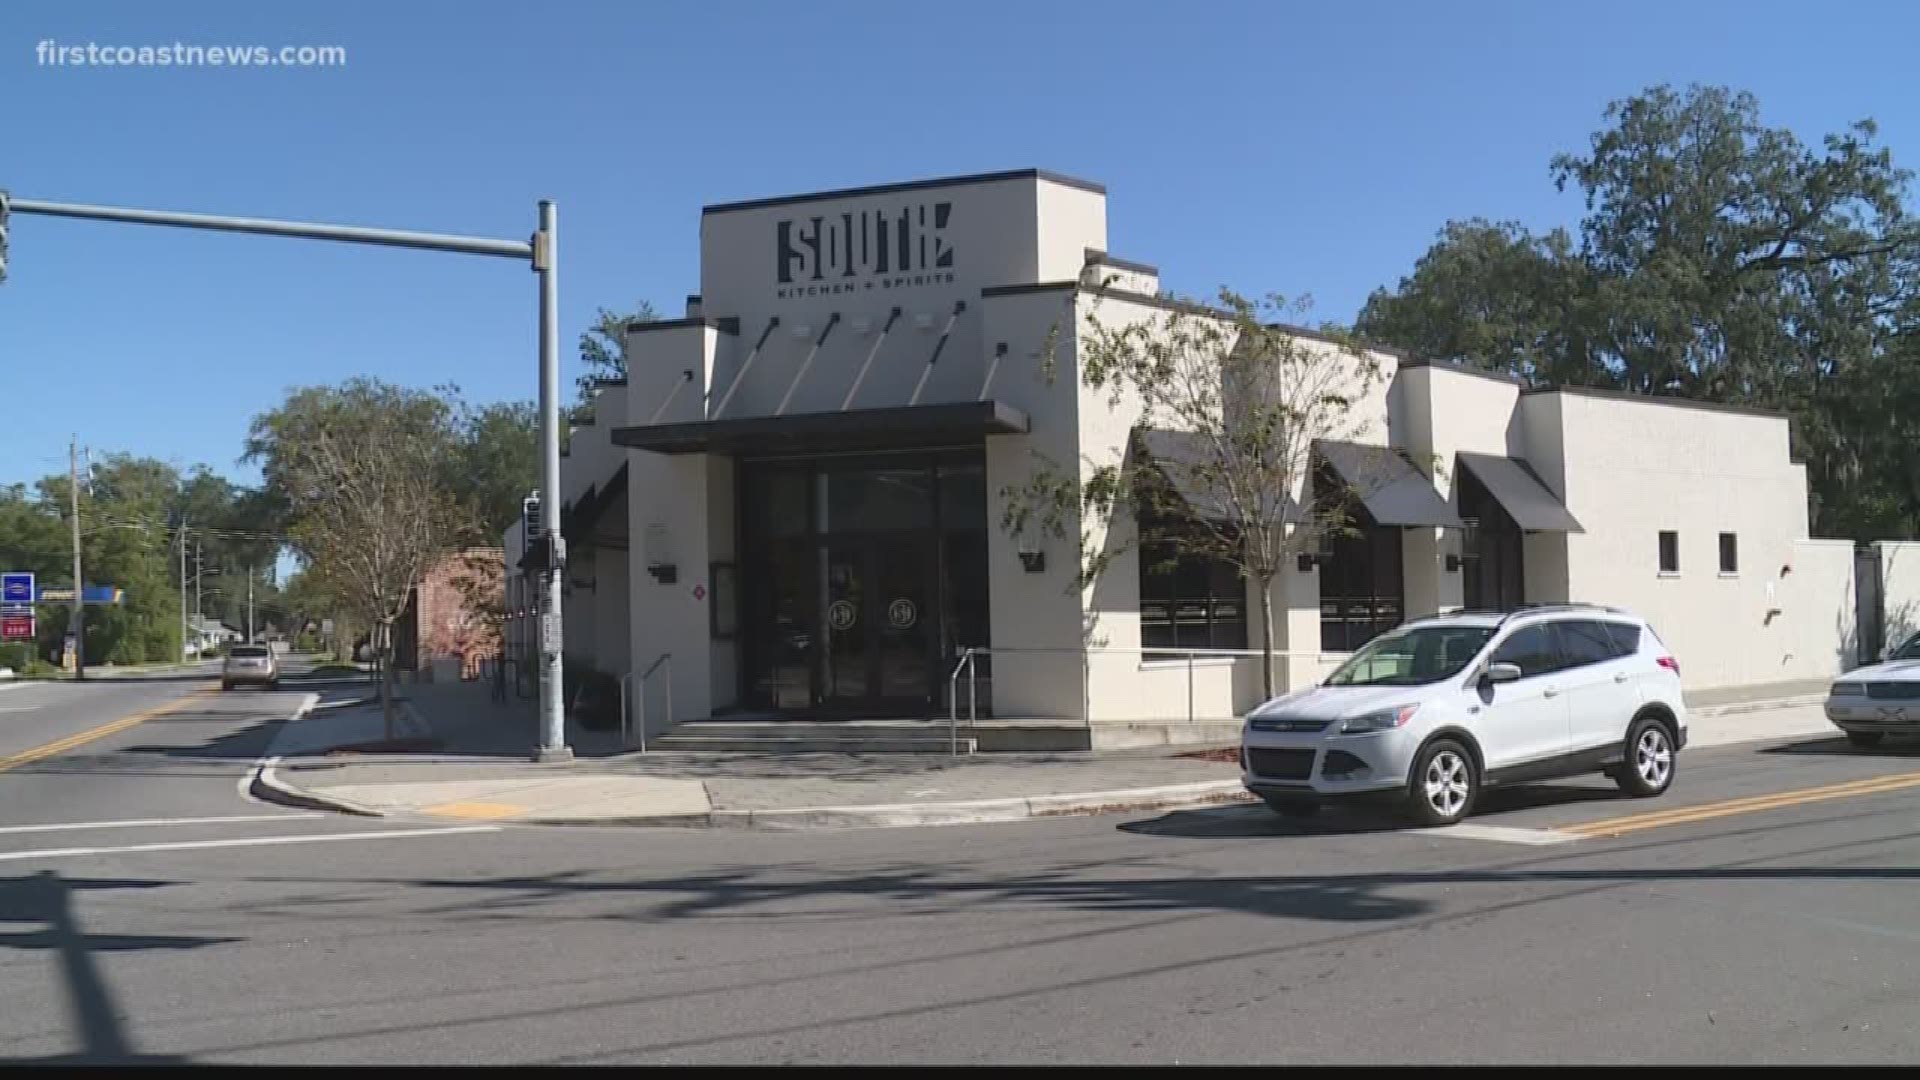 South Kitchen & Spirits has decided to close the doors of its Avondale location permanently after three years of business, according to a Tuesday social media post.